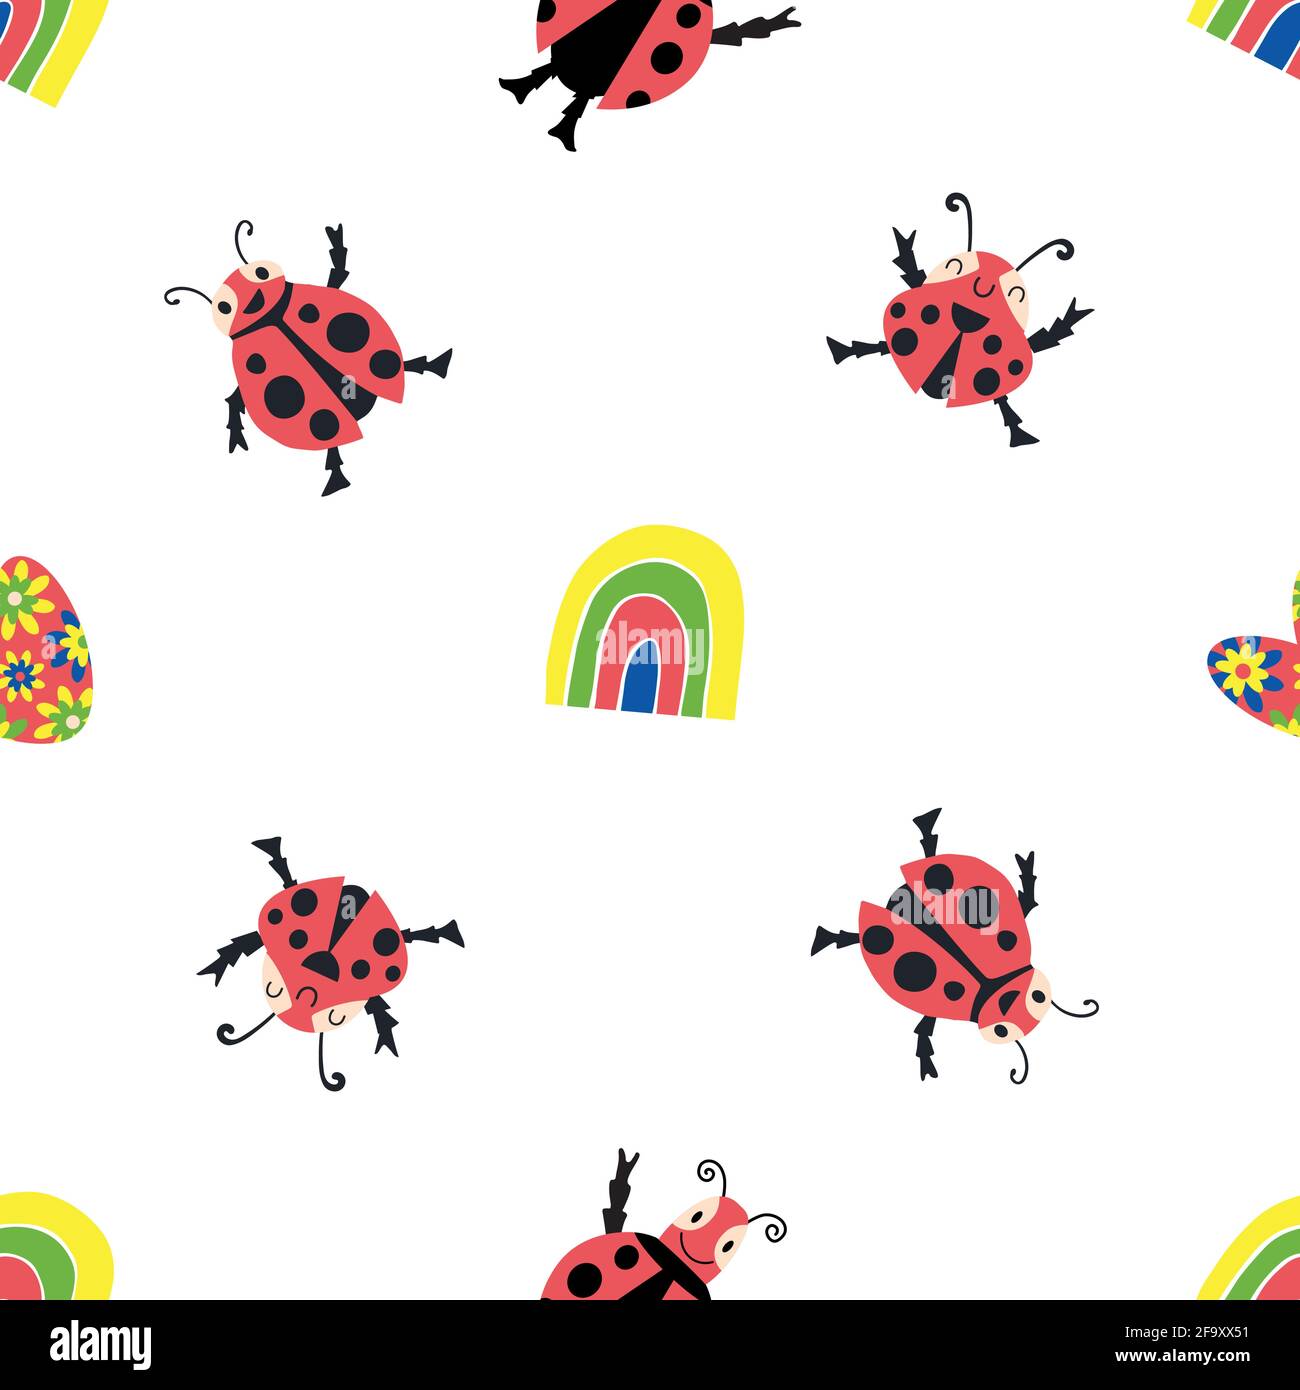 Cute kawaii ladybirds, rainbows, hearts seamless vector pattern background. Happy dancing ladybugs in childlike drawing style. Bright design with Stock Vector